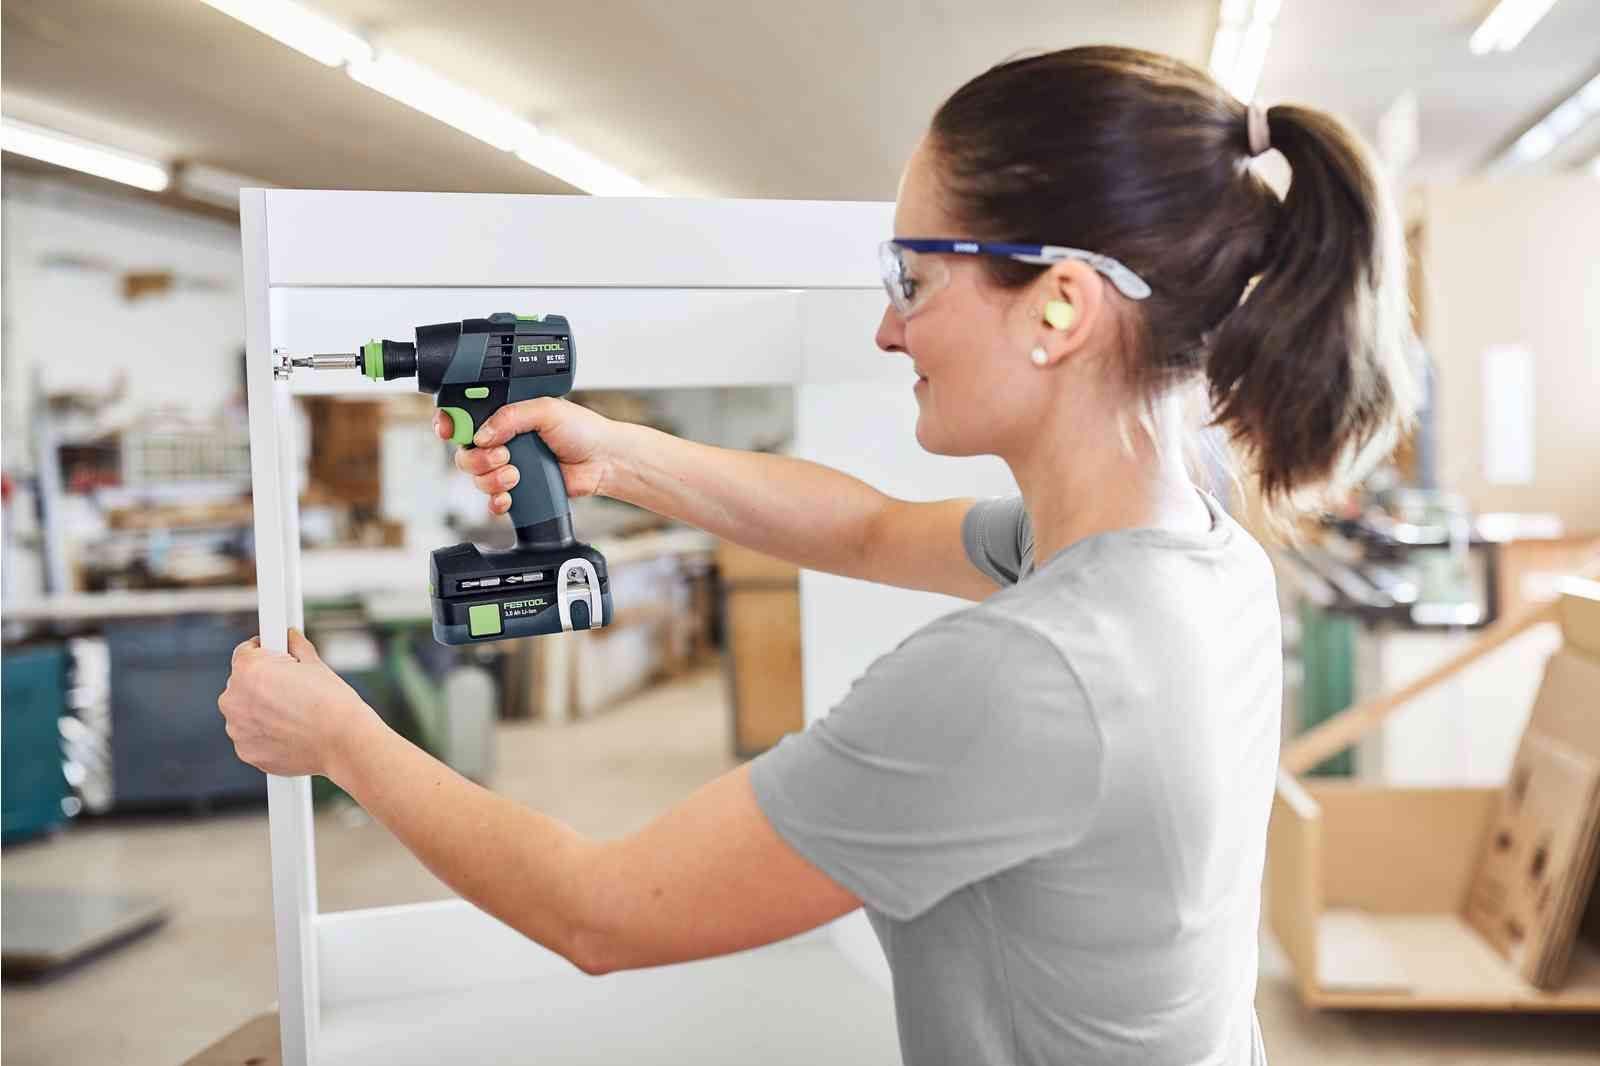 TXS 18V Cordless Compact 2 Speed Drill 5.2Ah Set in Systainer Kit 576895 by Festool